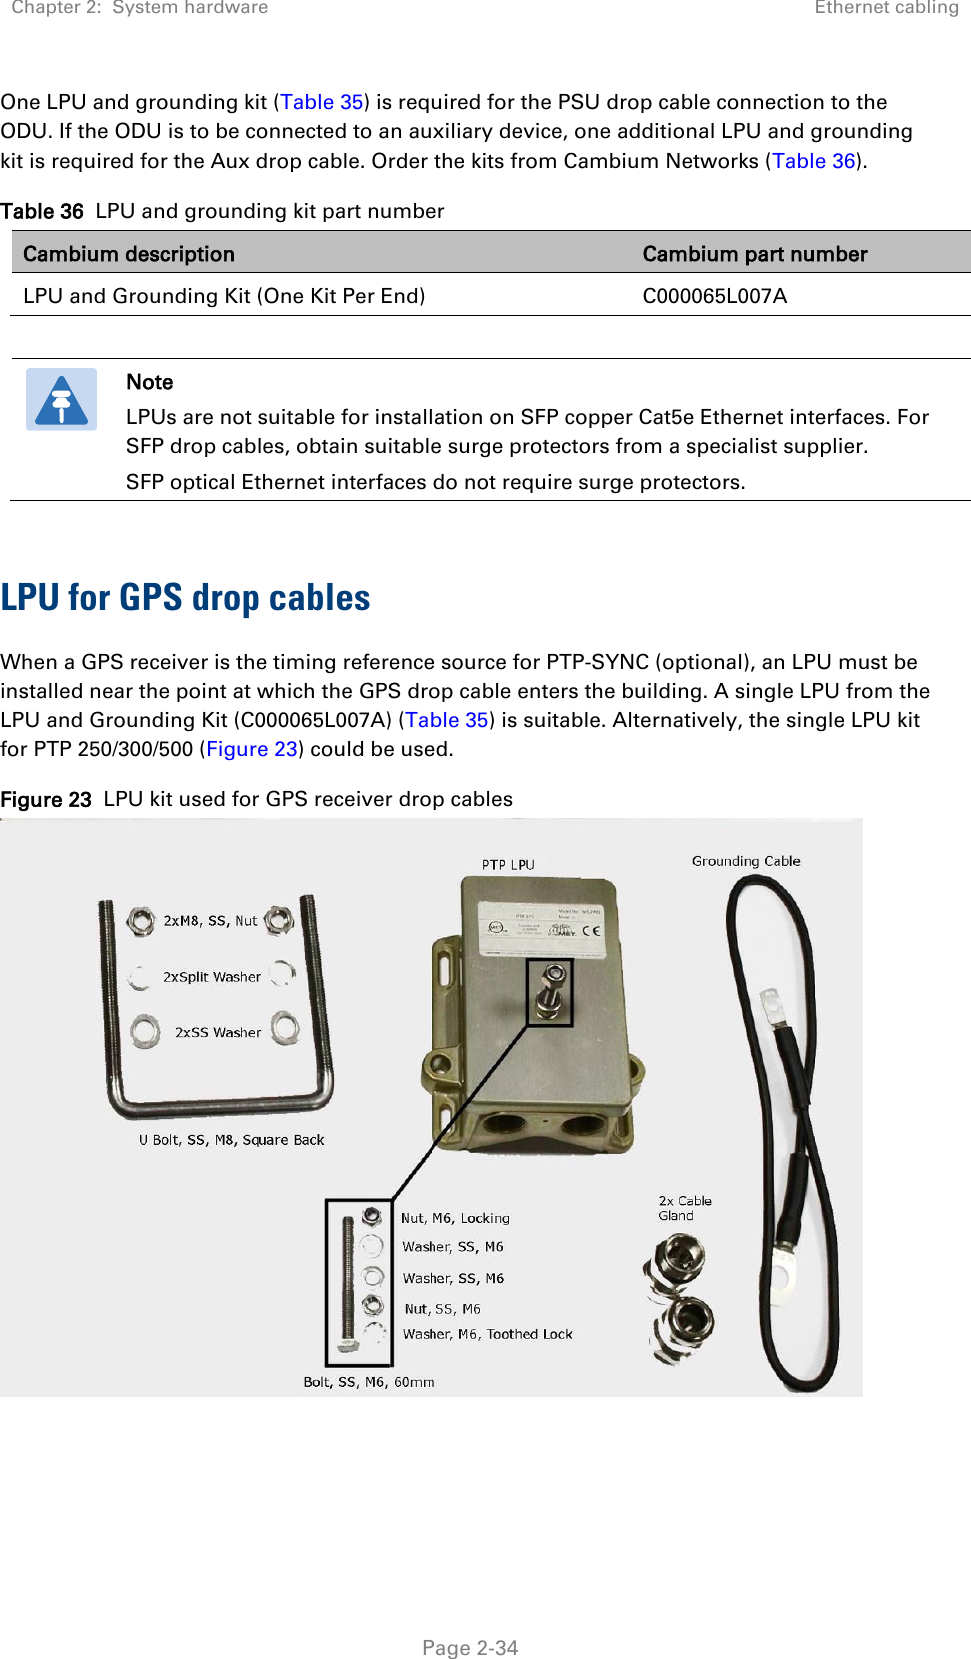 Chapter 2:  System hardware Ethernet cabling   Page 2-34 One LPU and grounding kit (Table 35) is required for the PSU drop cable connection to the ODU. If the ODU is to be connected to an auxiliary device, one additional LPU and grounding kit is required for the Aux drop cable. Order the kits from Cambium Networks (Table 36). Table 36  LPU and grounding kit part number Cambium description Cambium part number LPU and Grounding Kit (One Kit Per End) C000065L007A   Note LPUs are not suitable for installation on SFP copper Cat5e Ethernet interfaces. For SFP drop cables, obtain suitable surge protectors from a specialist supplier.  SFP optical Ethernet interfaces do not require surge protectors.   LPU for GPS drop cables When a GPS receiver is the timing reference source for PTP-SYNC (optional), an LPU must be installed near the point at which the GPS drop cable enters the building. A single LPU from the LPU and Grounding Kit (C000065L007A) (Table 35) is suitable. Alternatively, the single LPU kit for PTP 250/300/500 (Figure 23) could be used. Figure 23  LPU kit used for GPS receiver drop cables    